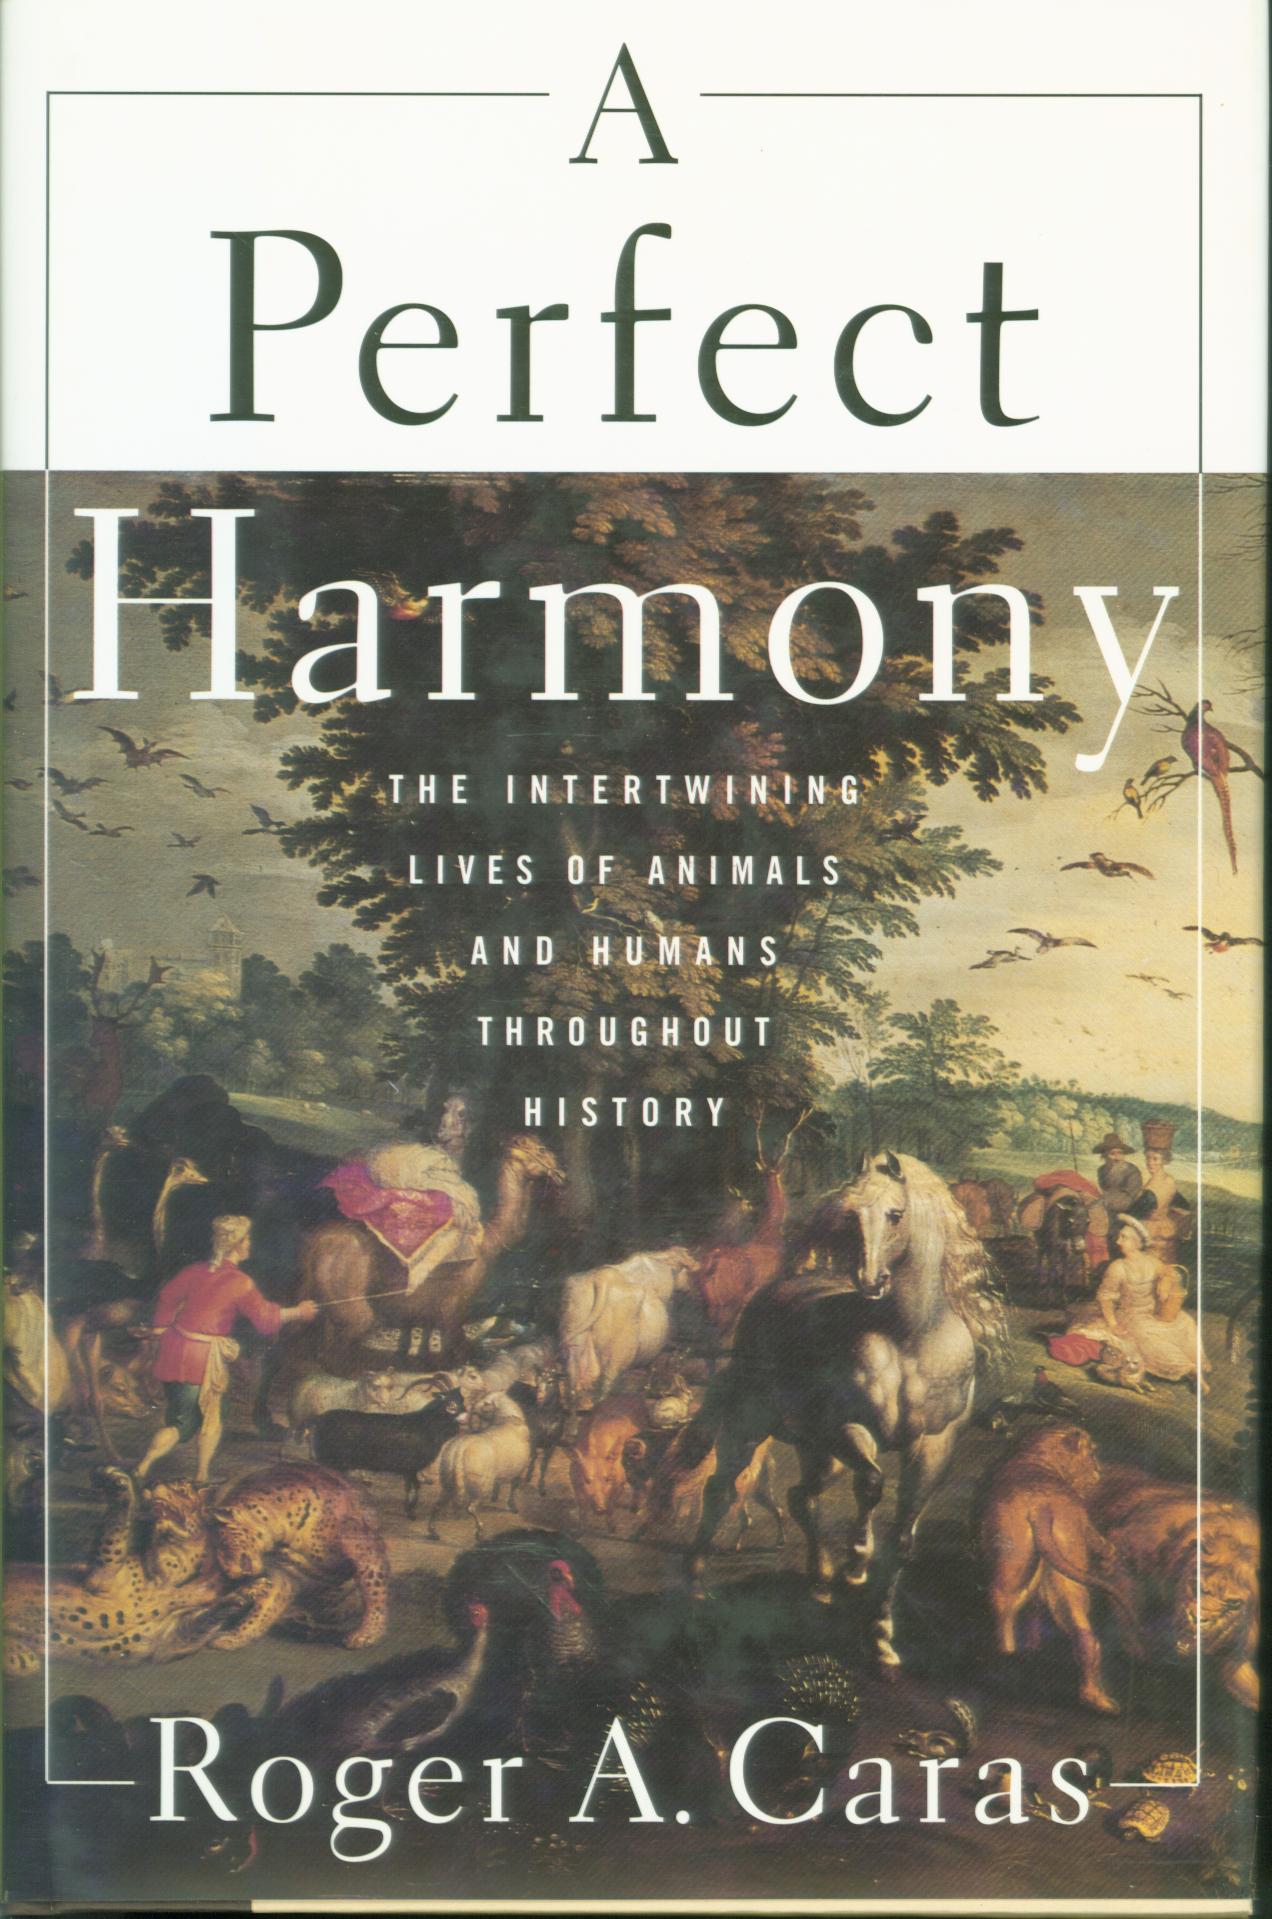 A PERFECT HARMONY: the intertwining lives of animals and humans throughout history.